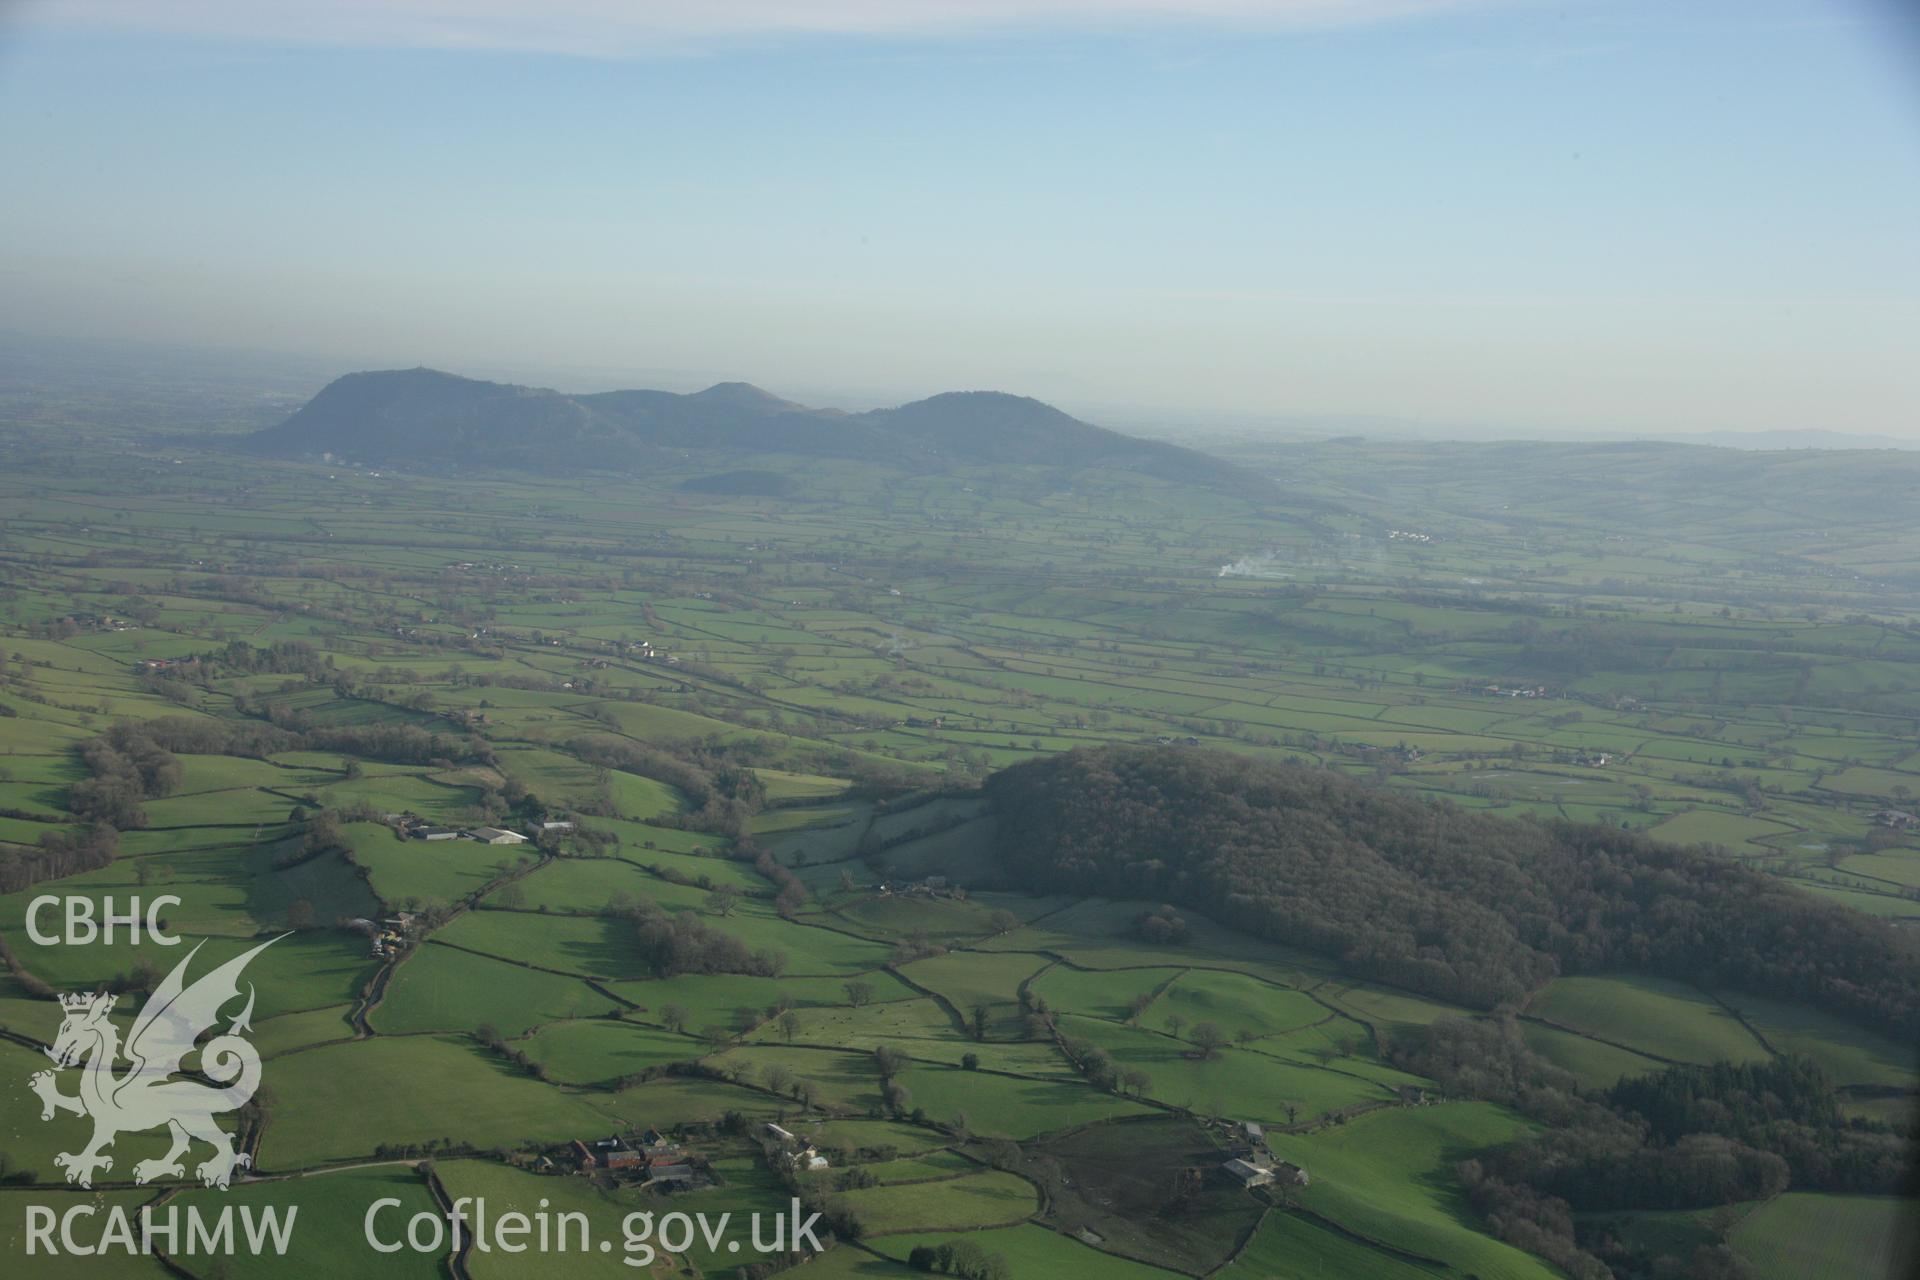 RCAHMW colour oblique aerial photograph of Gaer Fawr, Guilsfiel, and surrounding landscape. Taken on 25 January 2007 by Toby Driver